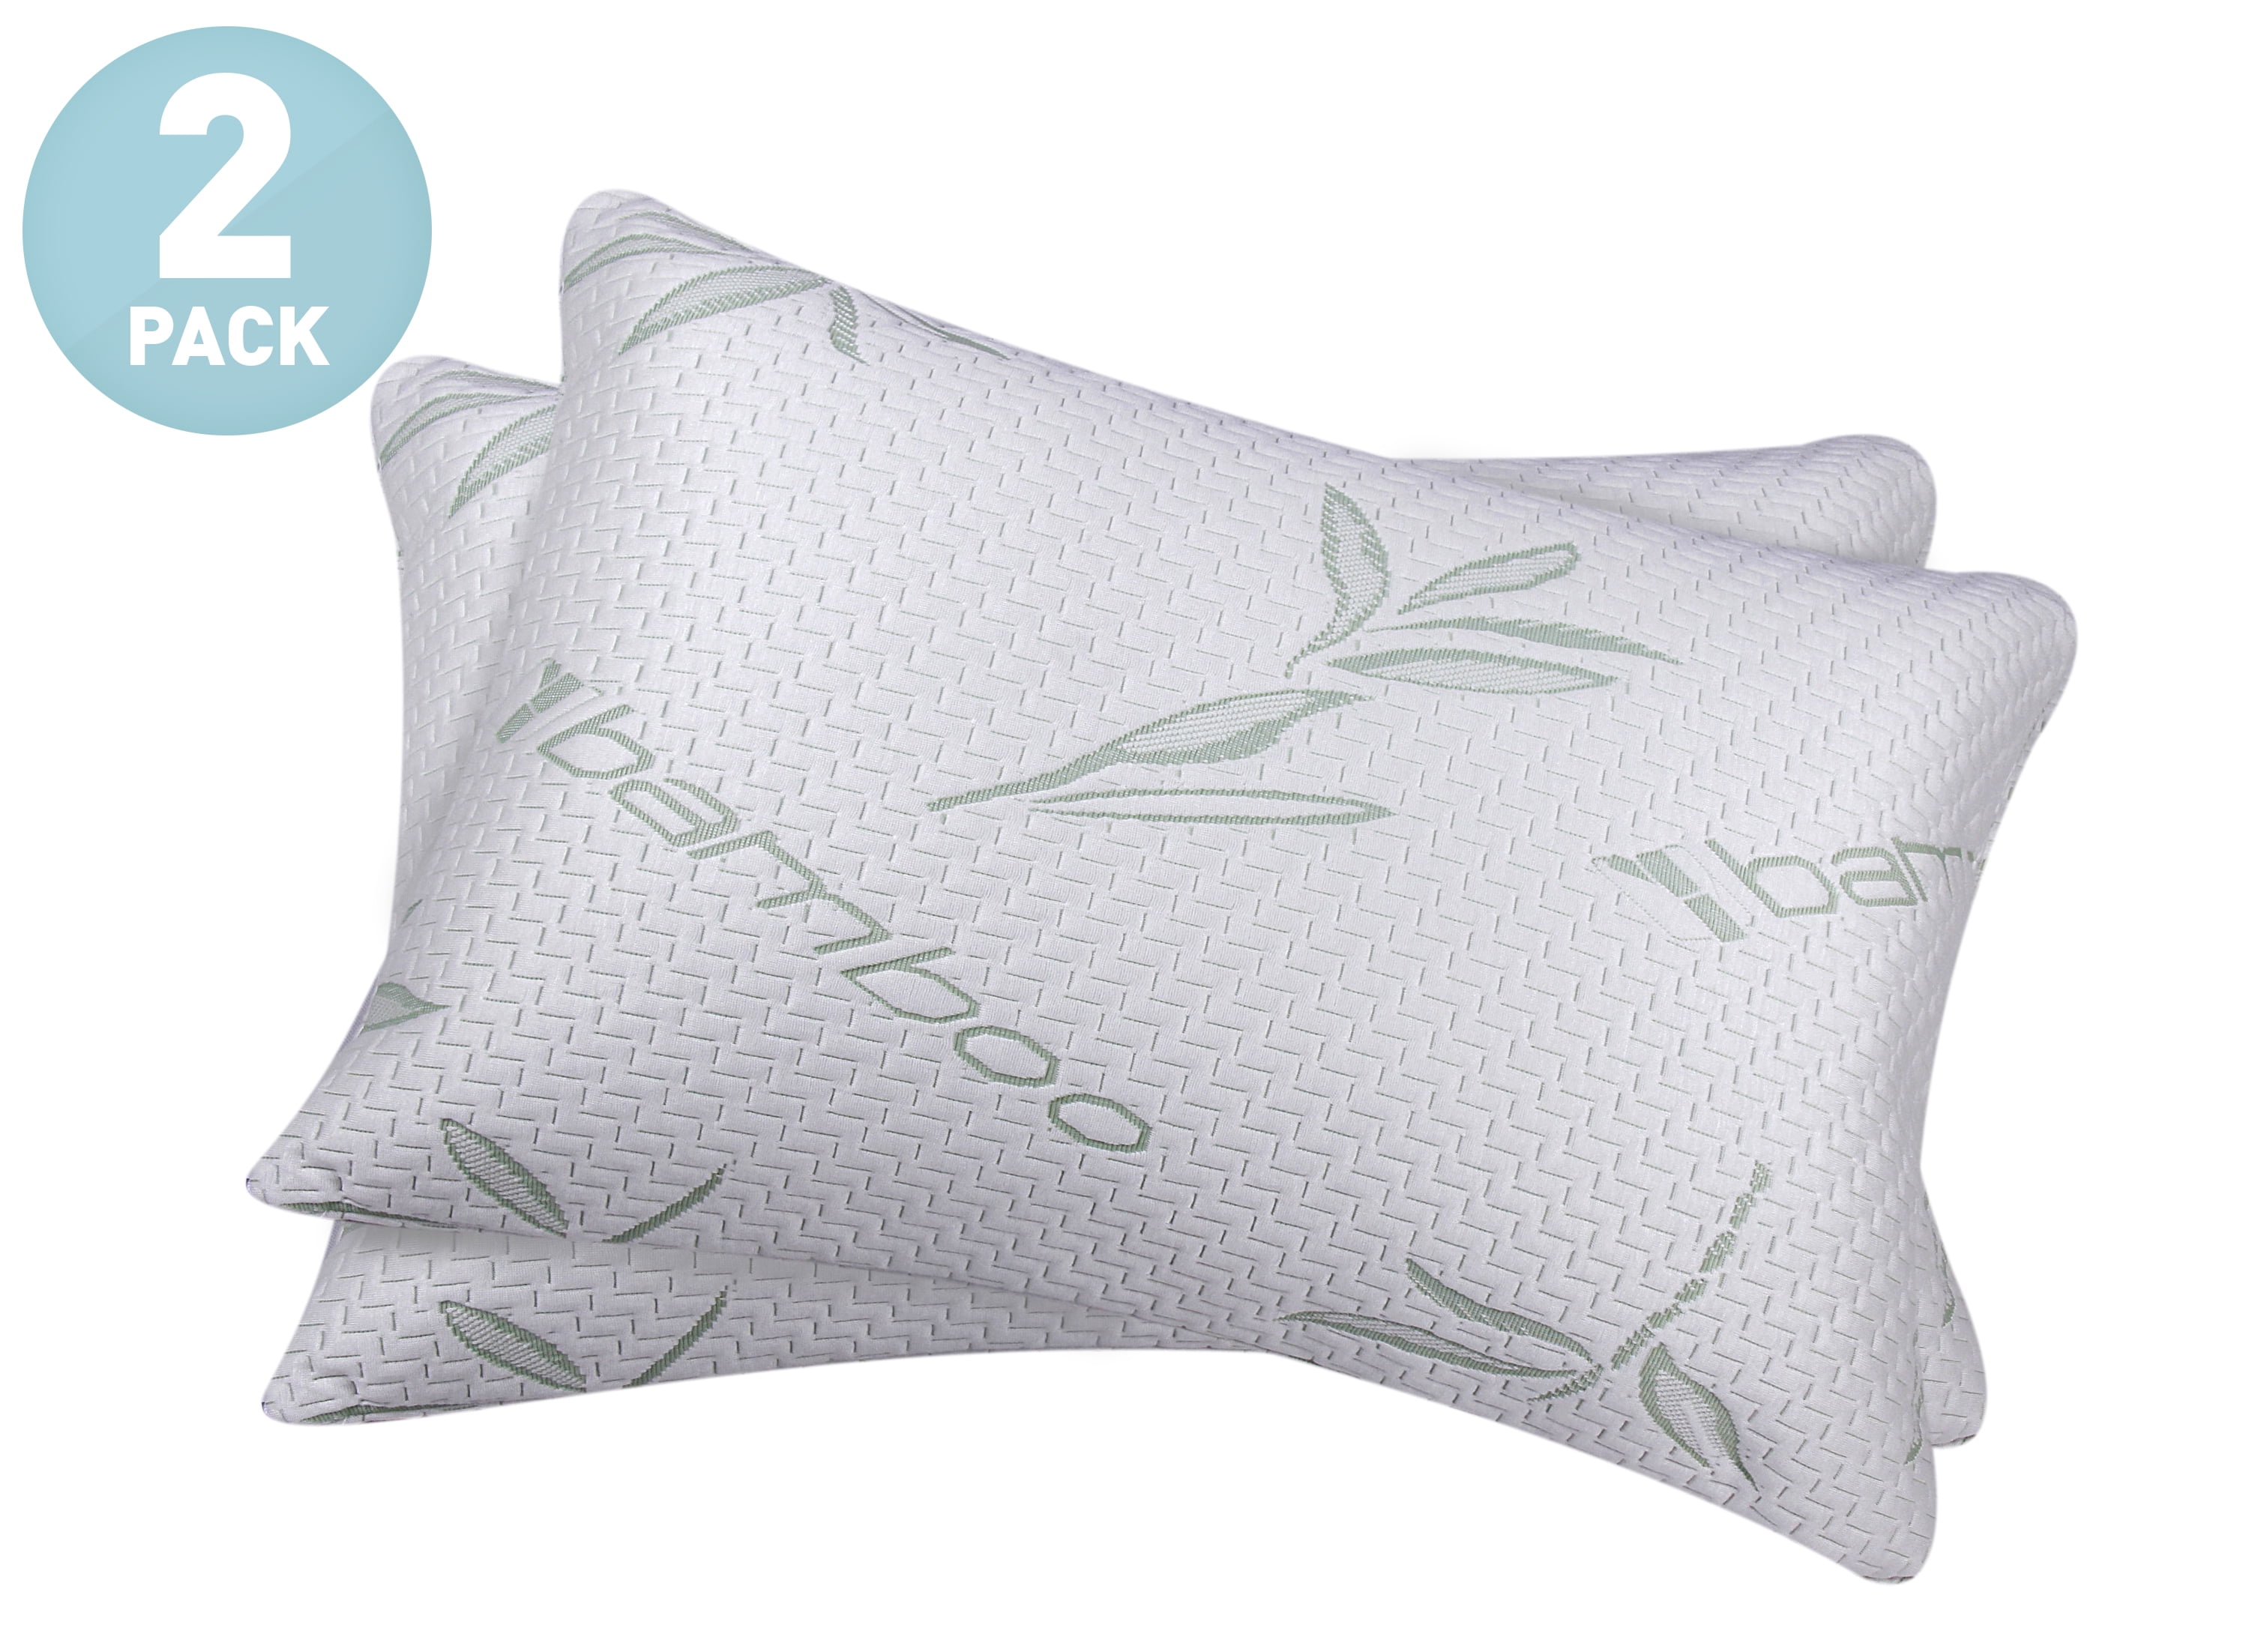 Hypoallergenic Cover Bamboo Comfort Memory Foam Pillows 1 or 2 Pack 